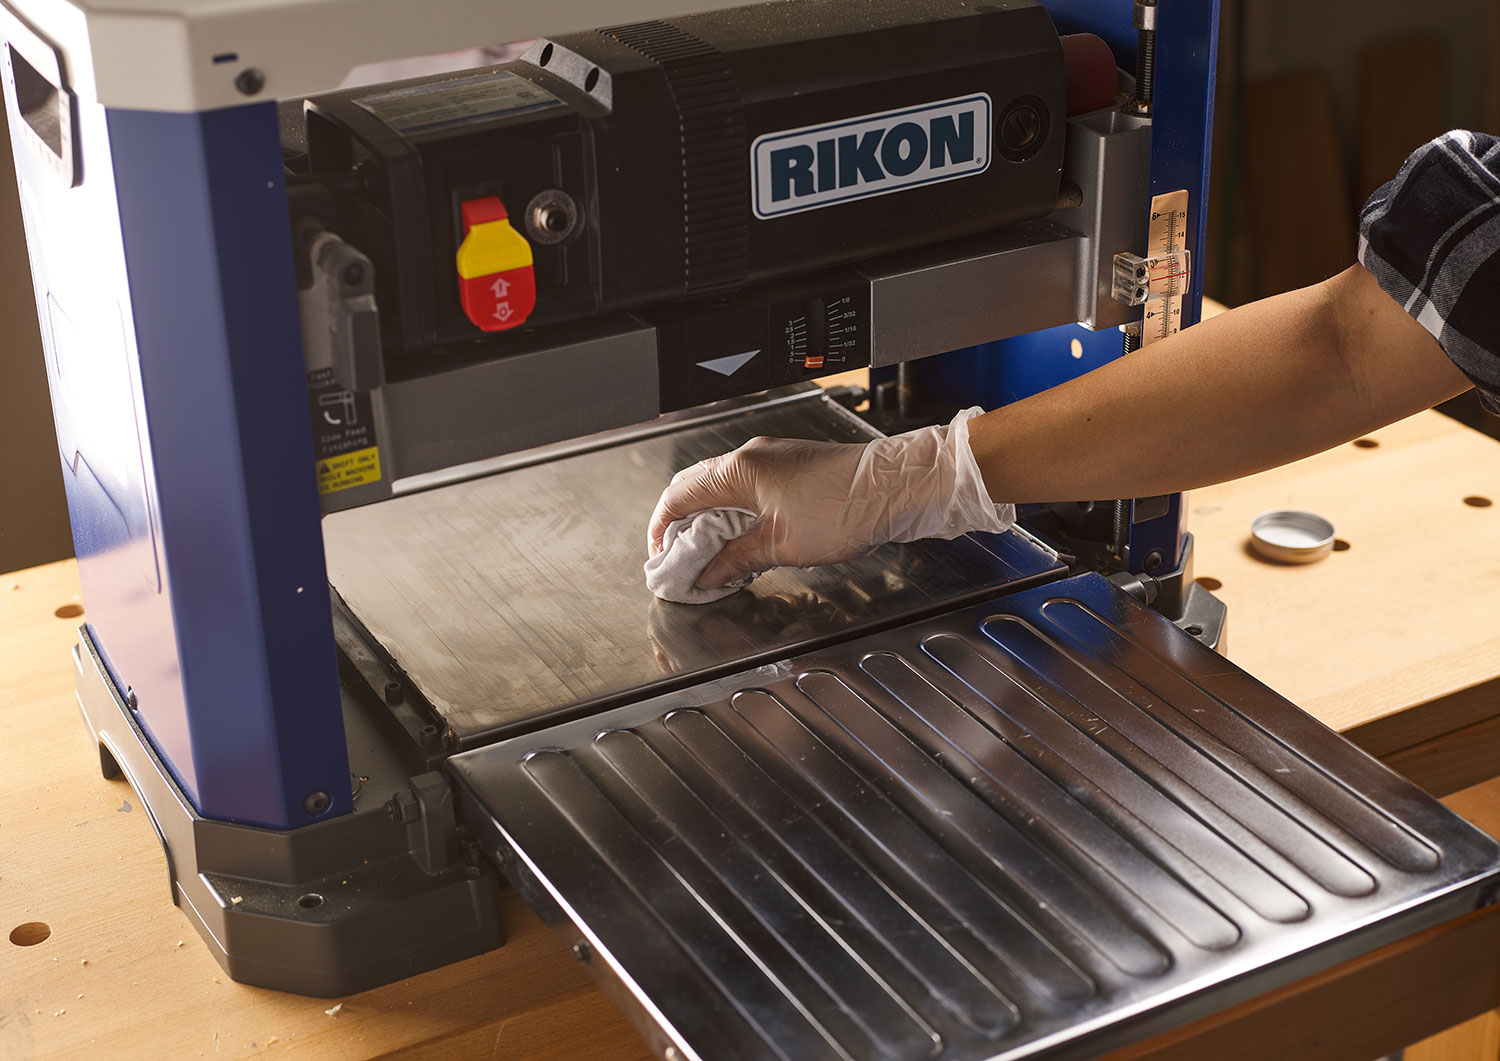 The bed of a Rikon helical planer is being wiped with a white cloth.